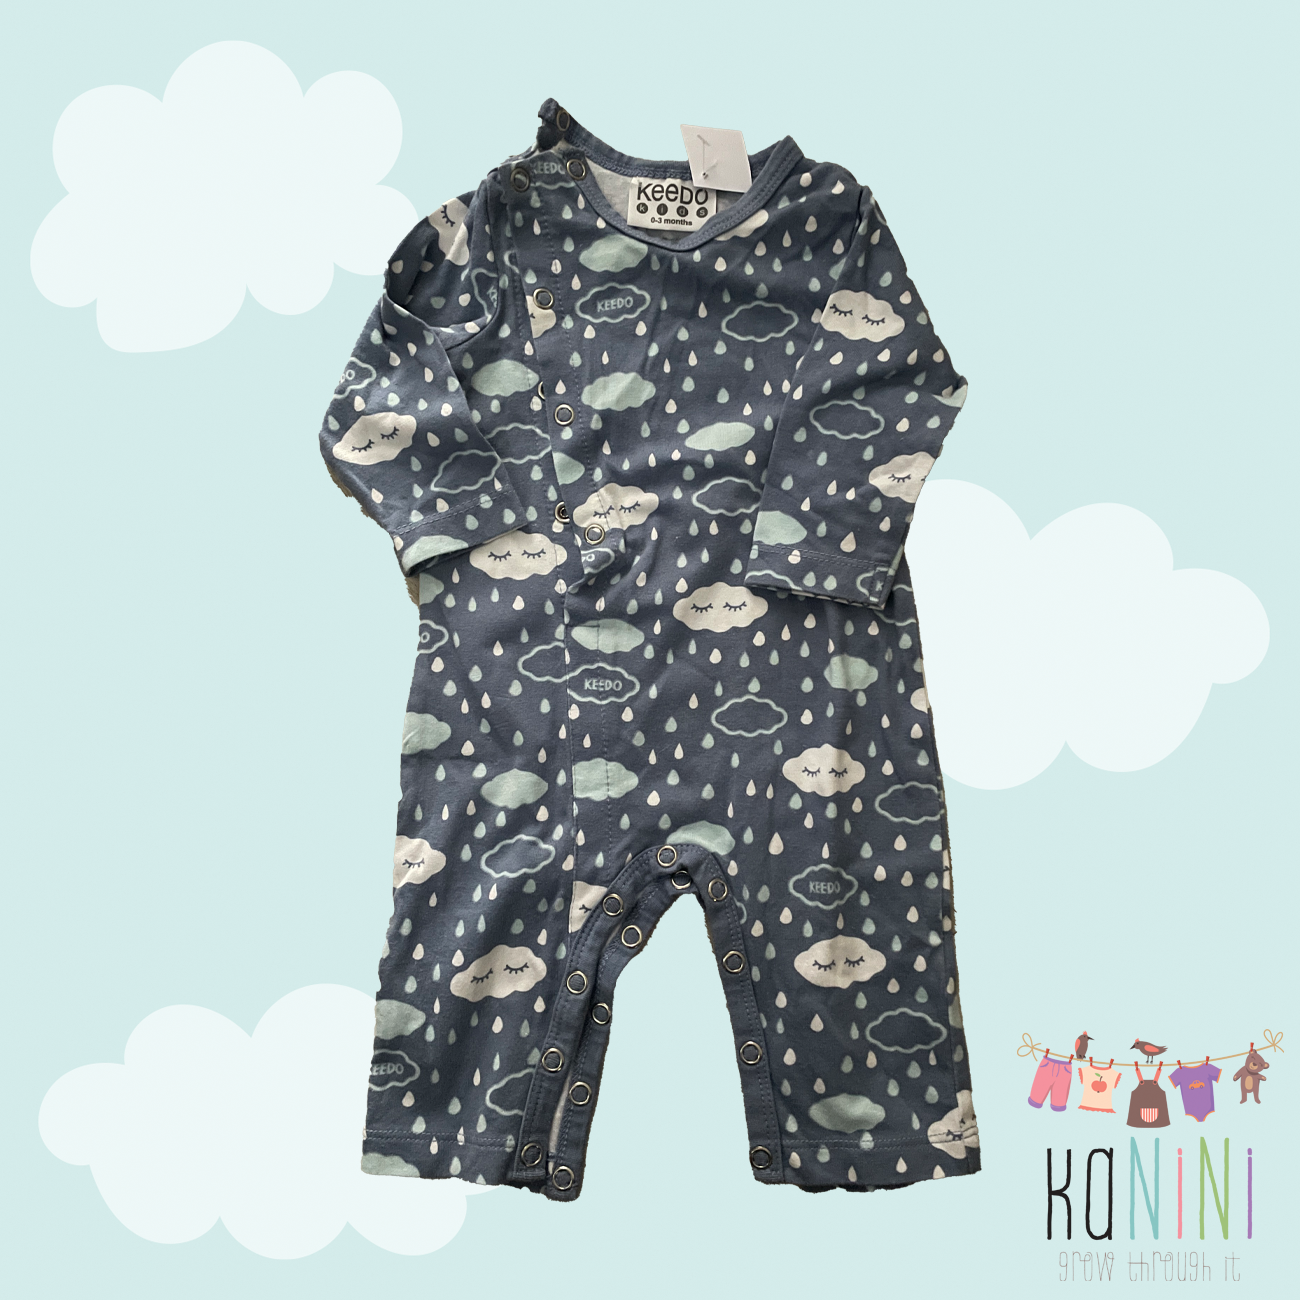 Featured image for “Keedo 0 - 3 Months Boys Cloud Babygrow”